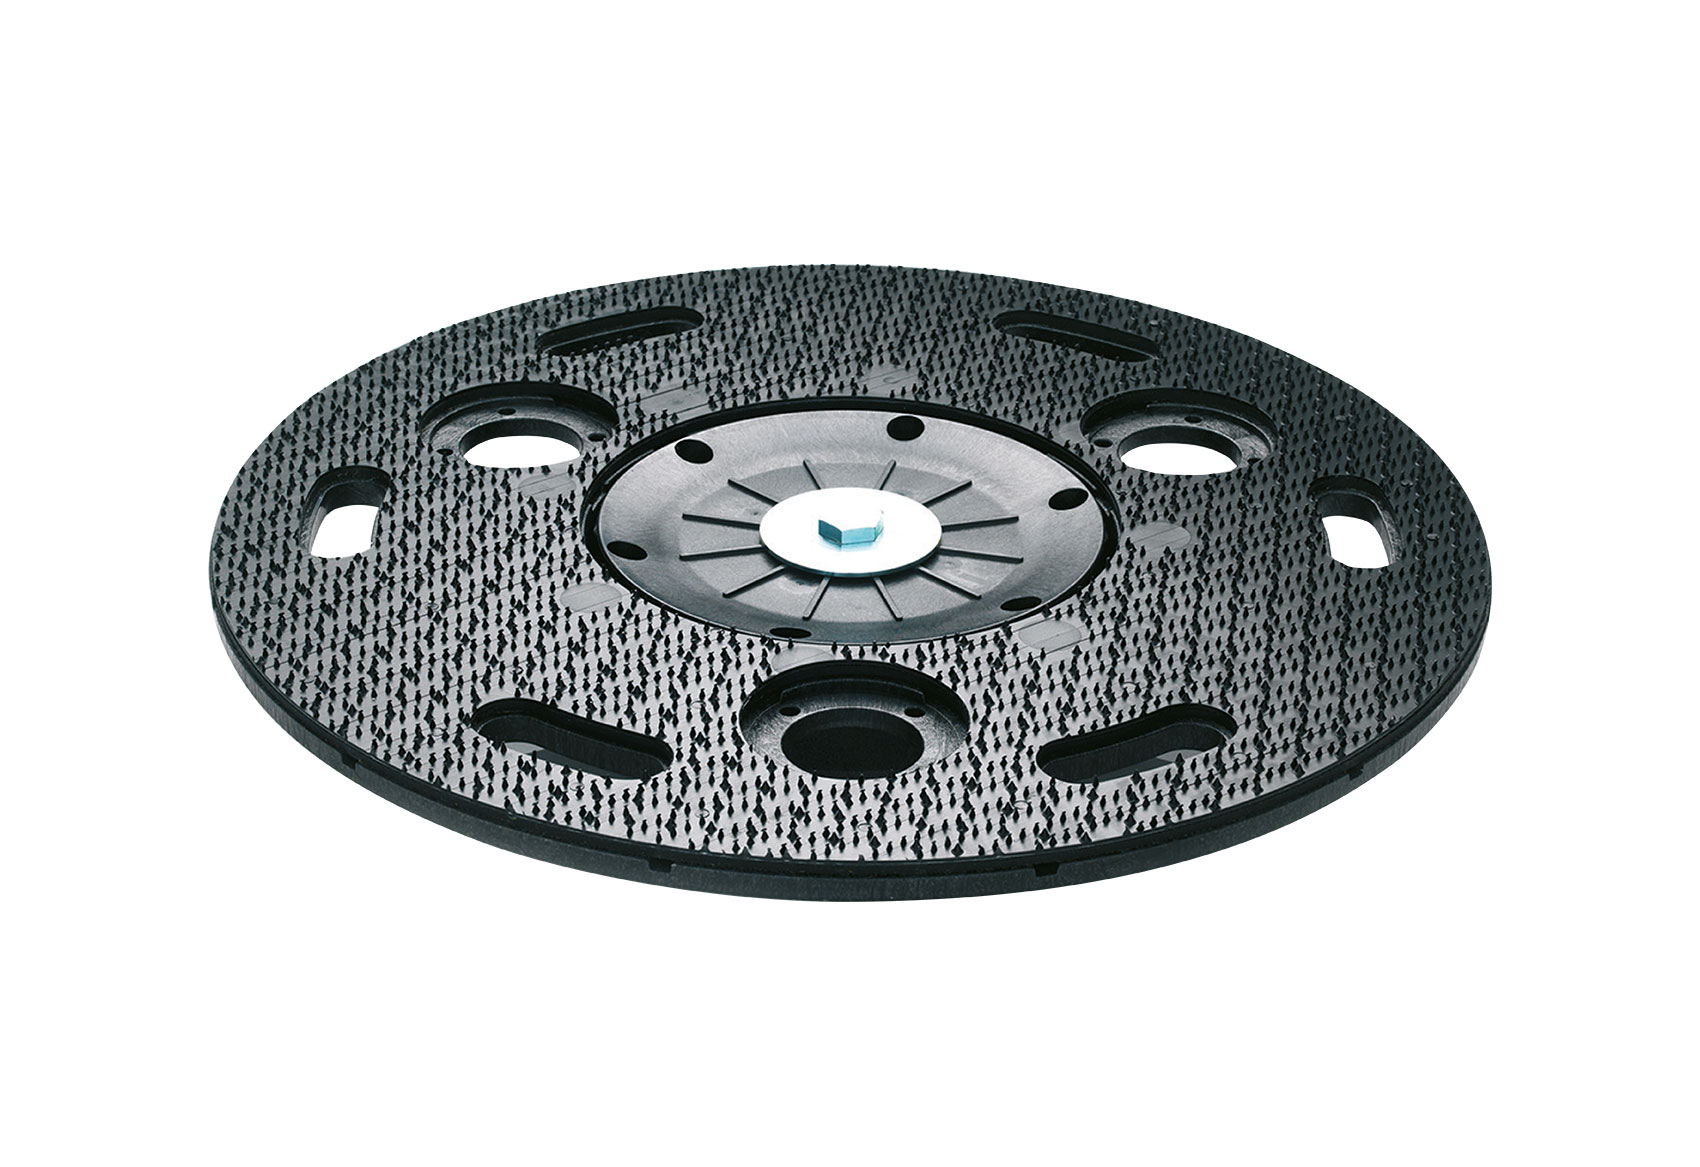 407mm drive plate included with Bona FlexiSand 1.9